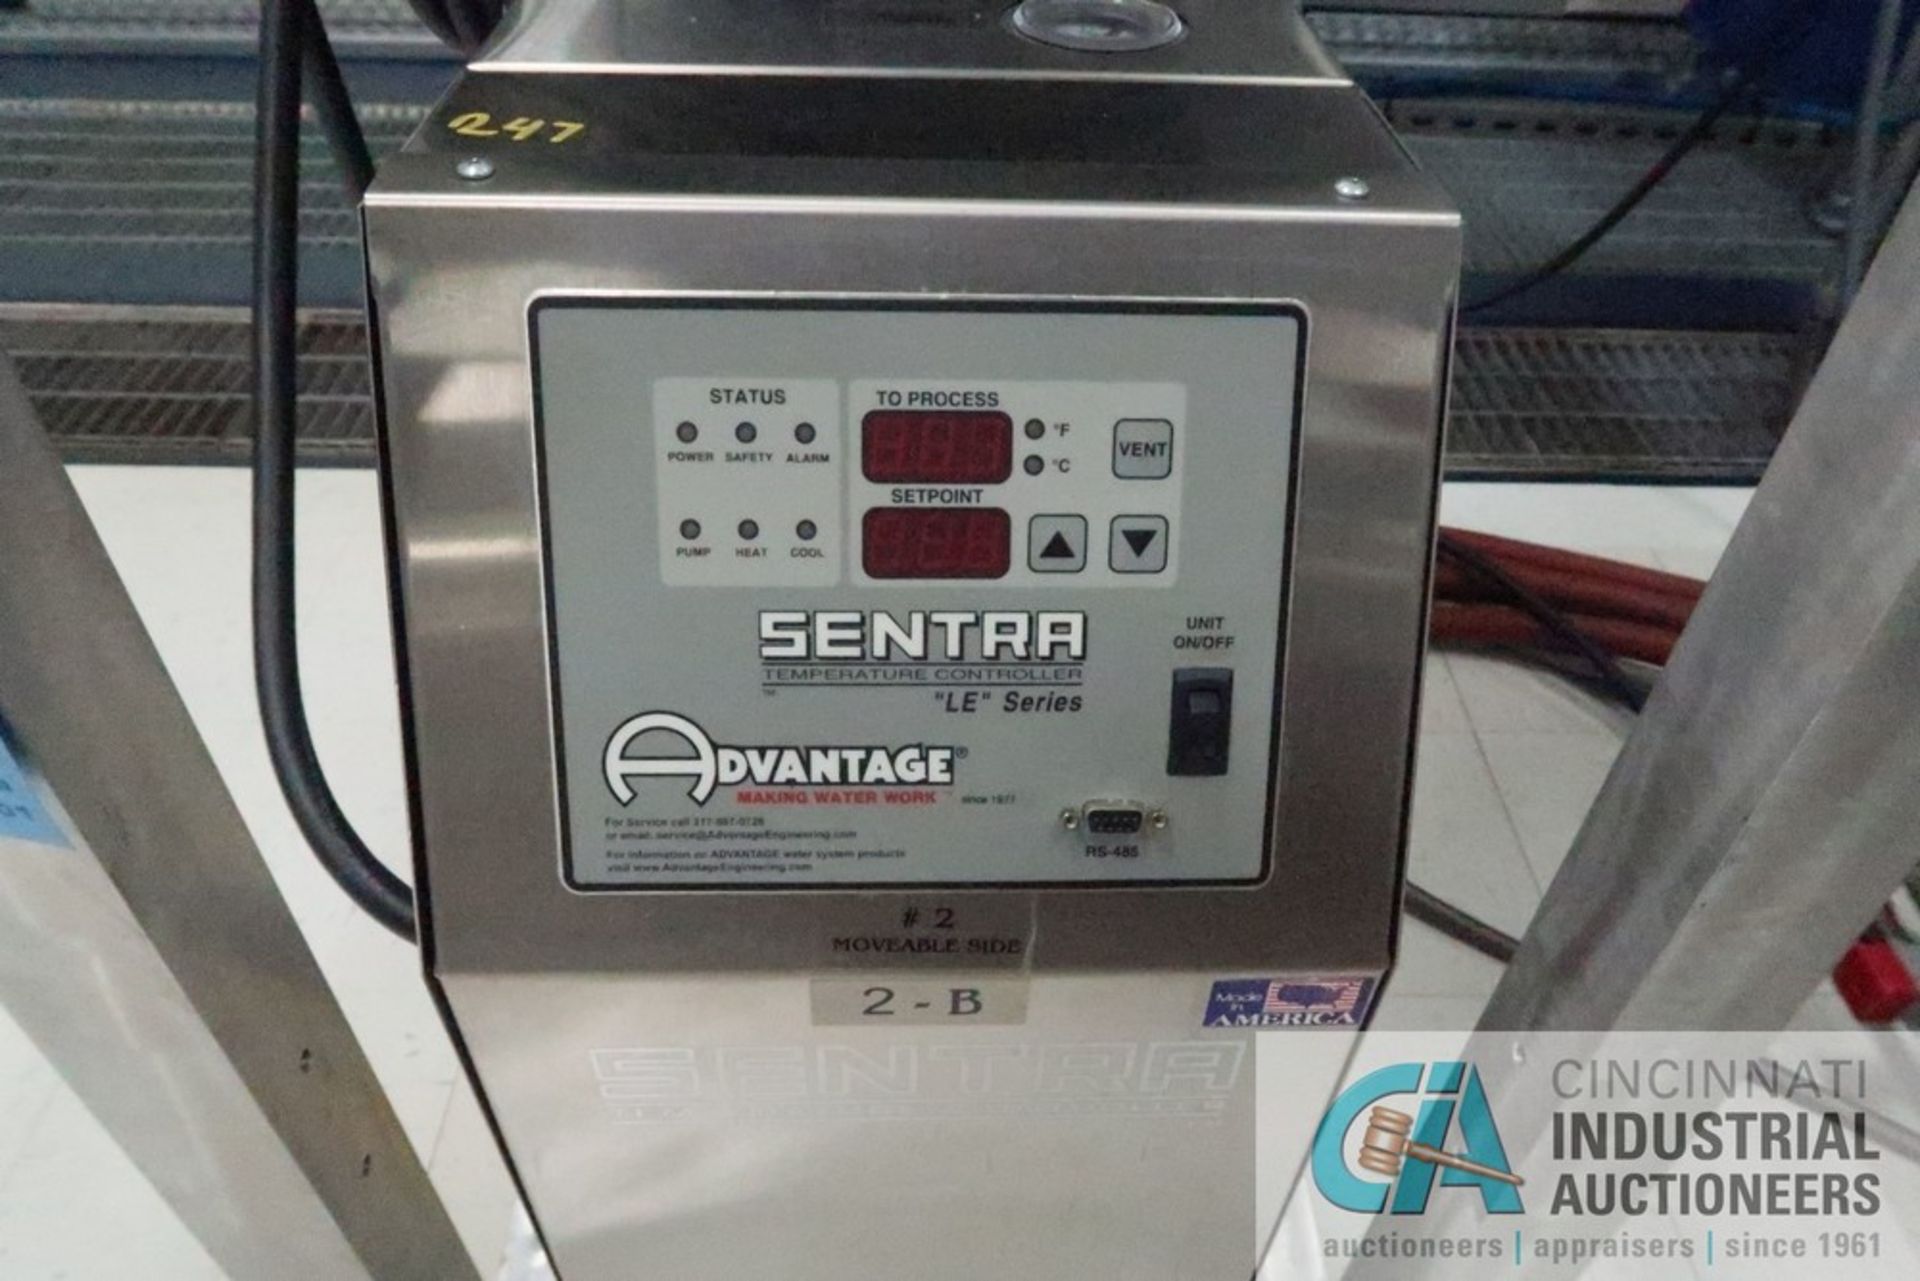 ADVANTAGE SENTRA "LE" SERIES TEMPERATURE CONTROLLERS; S/N 89635 AND 87636 (12-2-2004) - Image 6 of 7